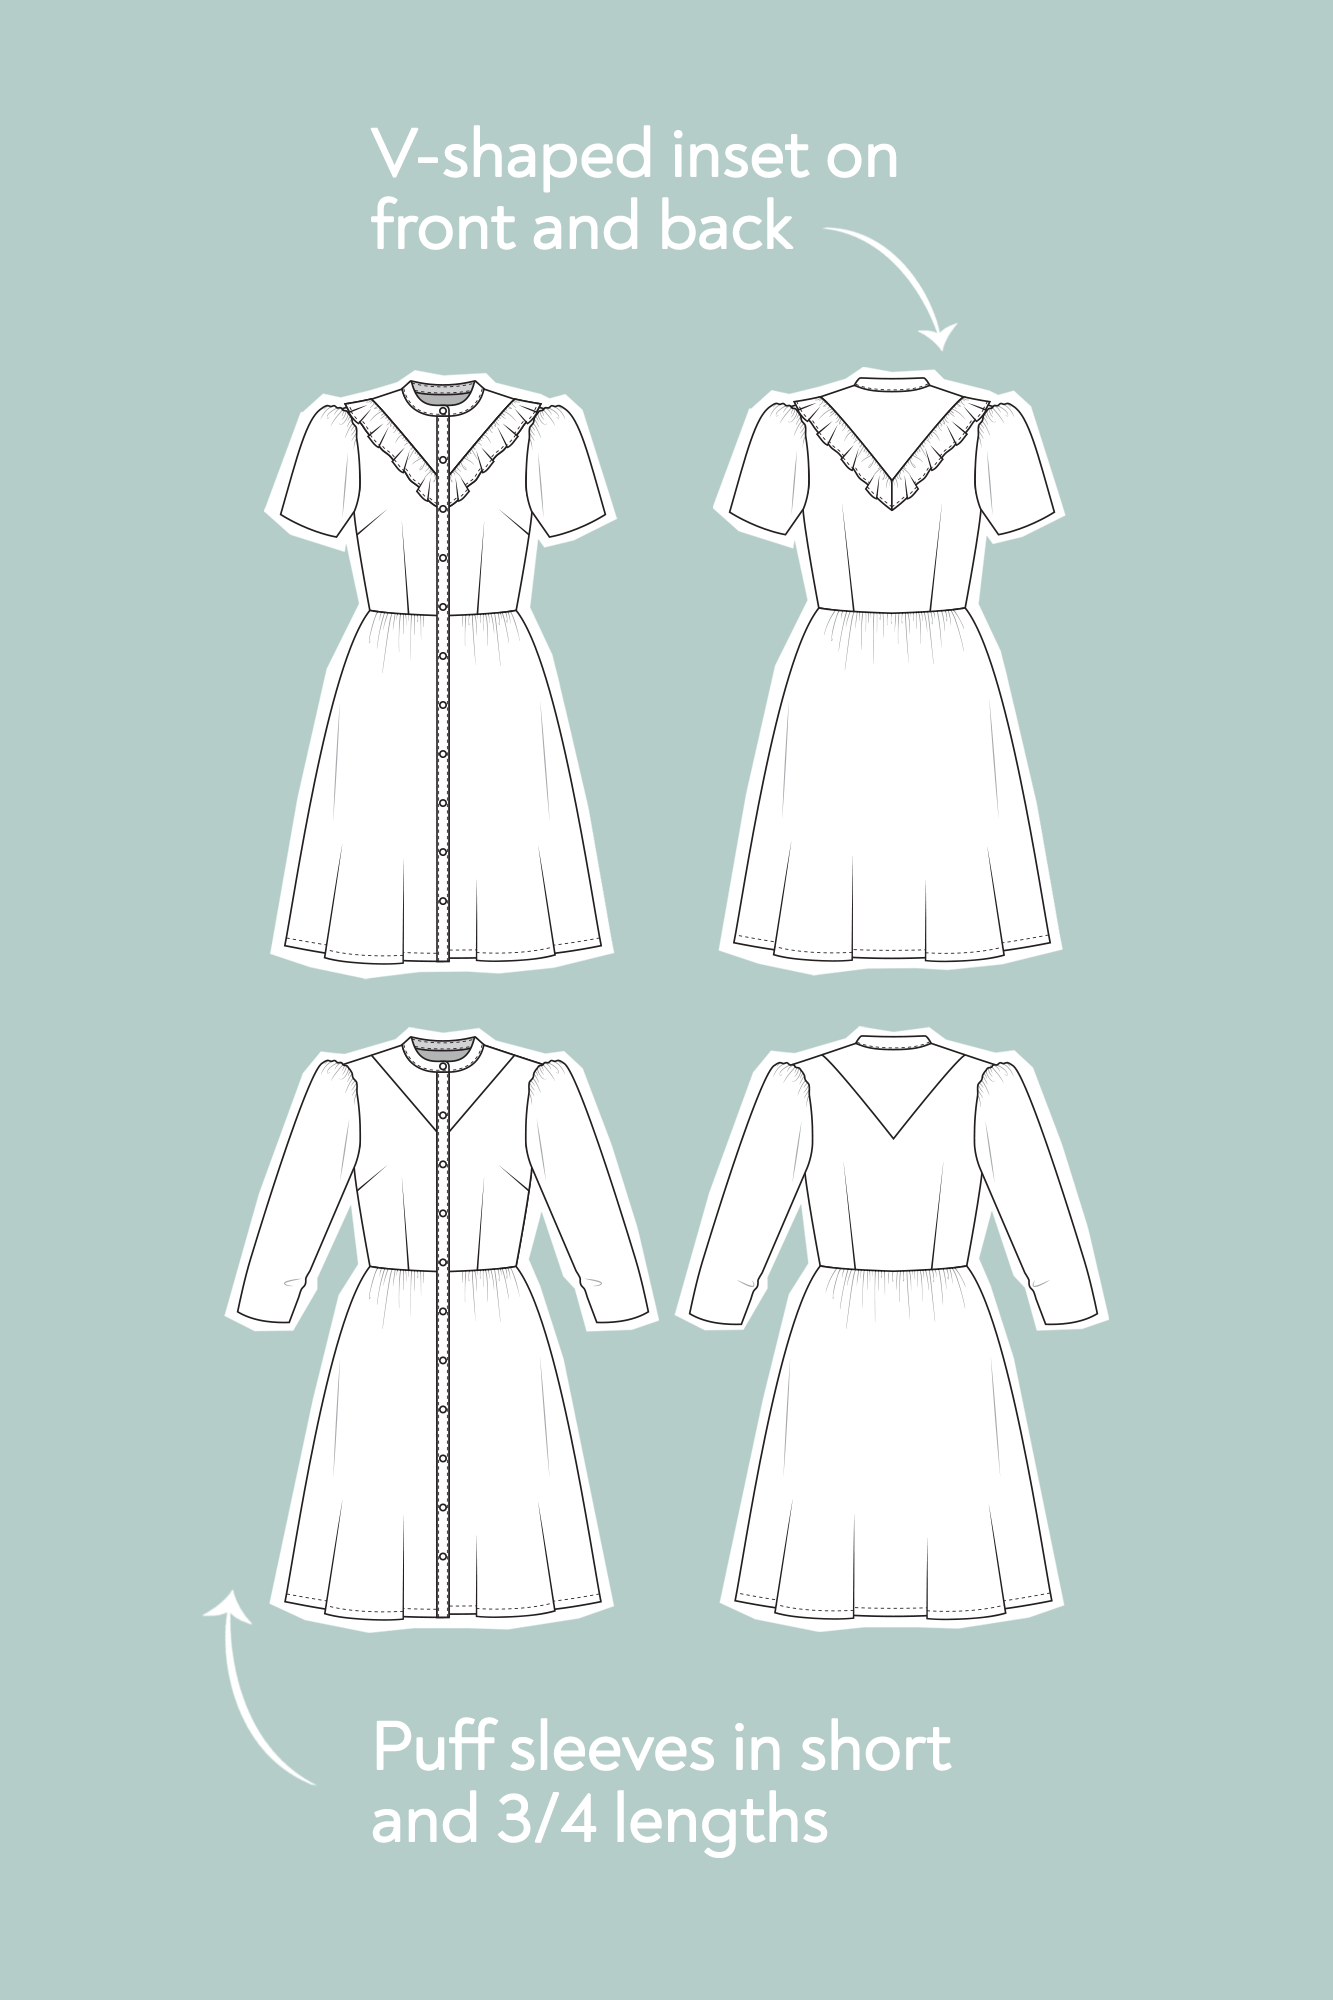 Line drawings for Kelly shirt dress showing front views